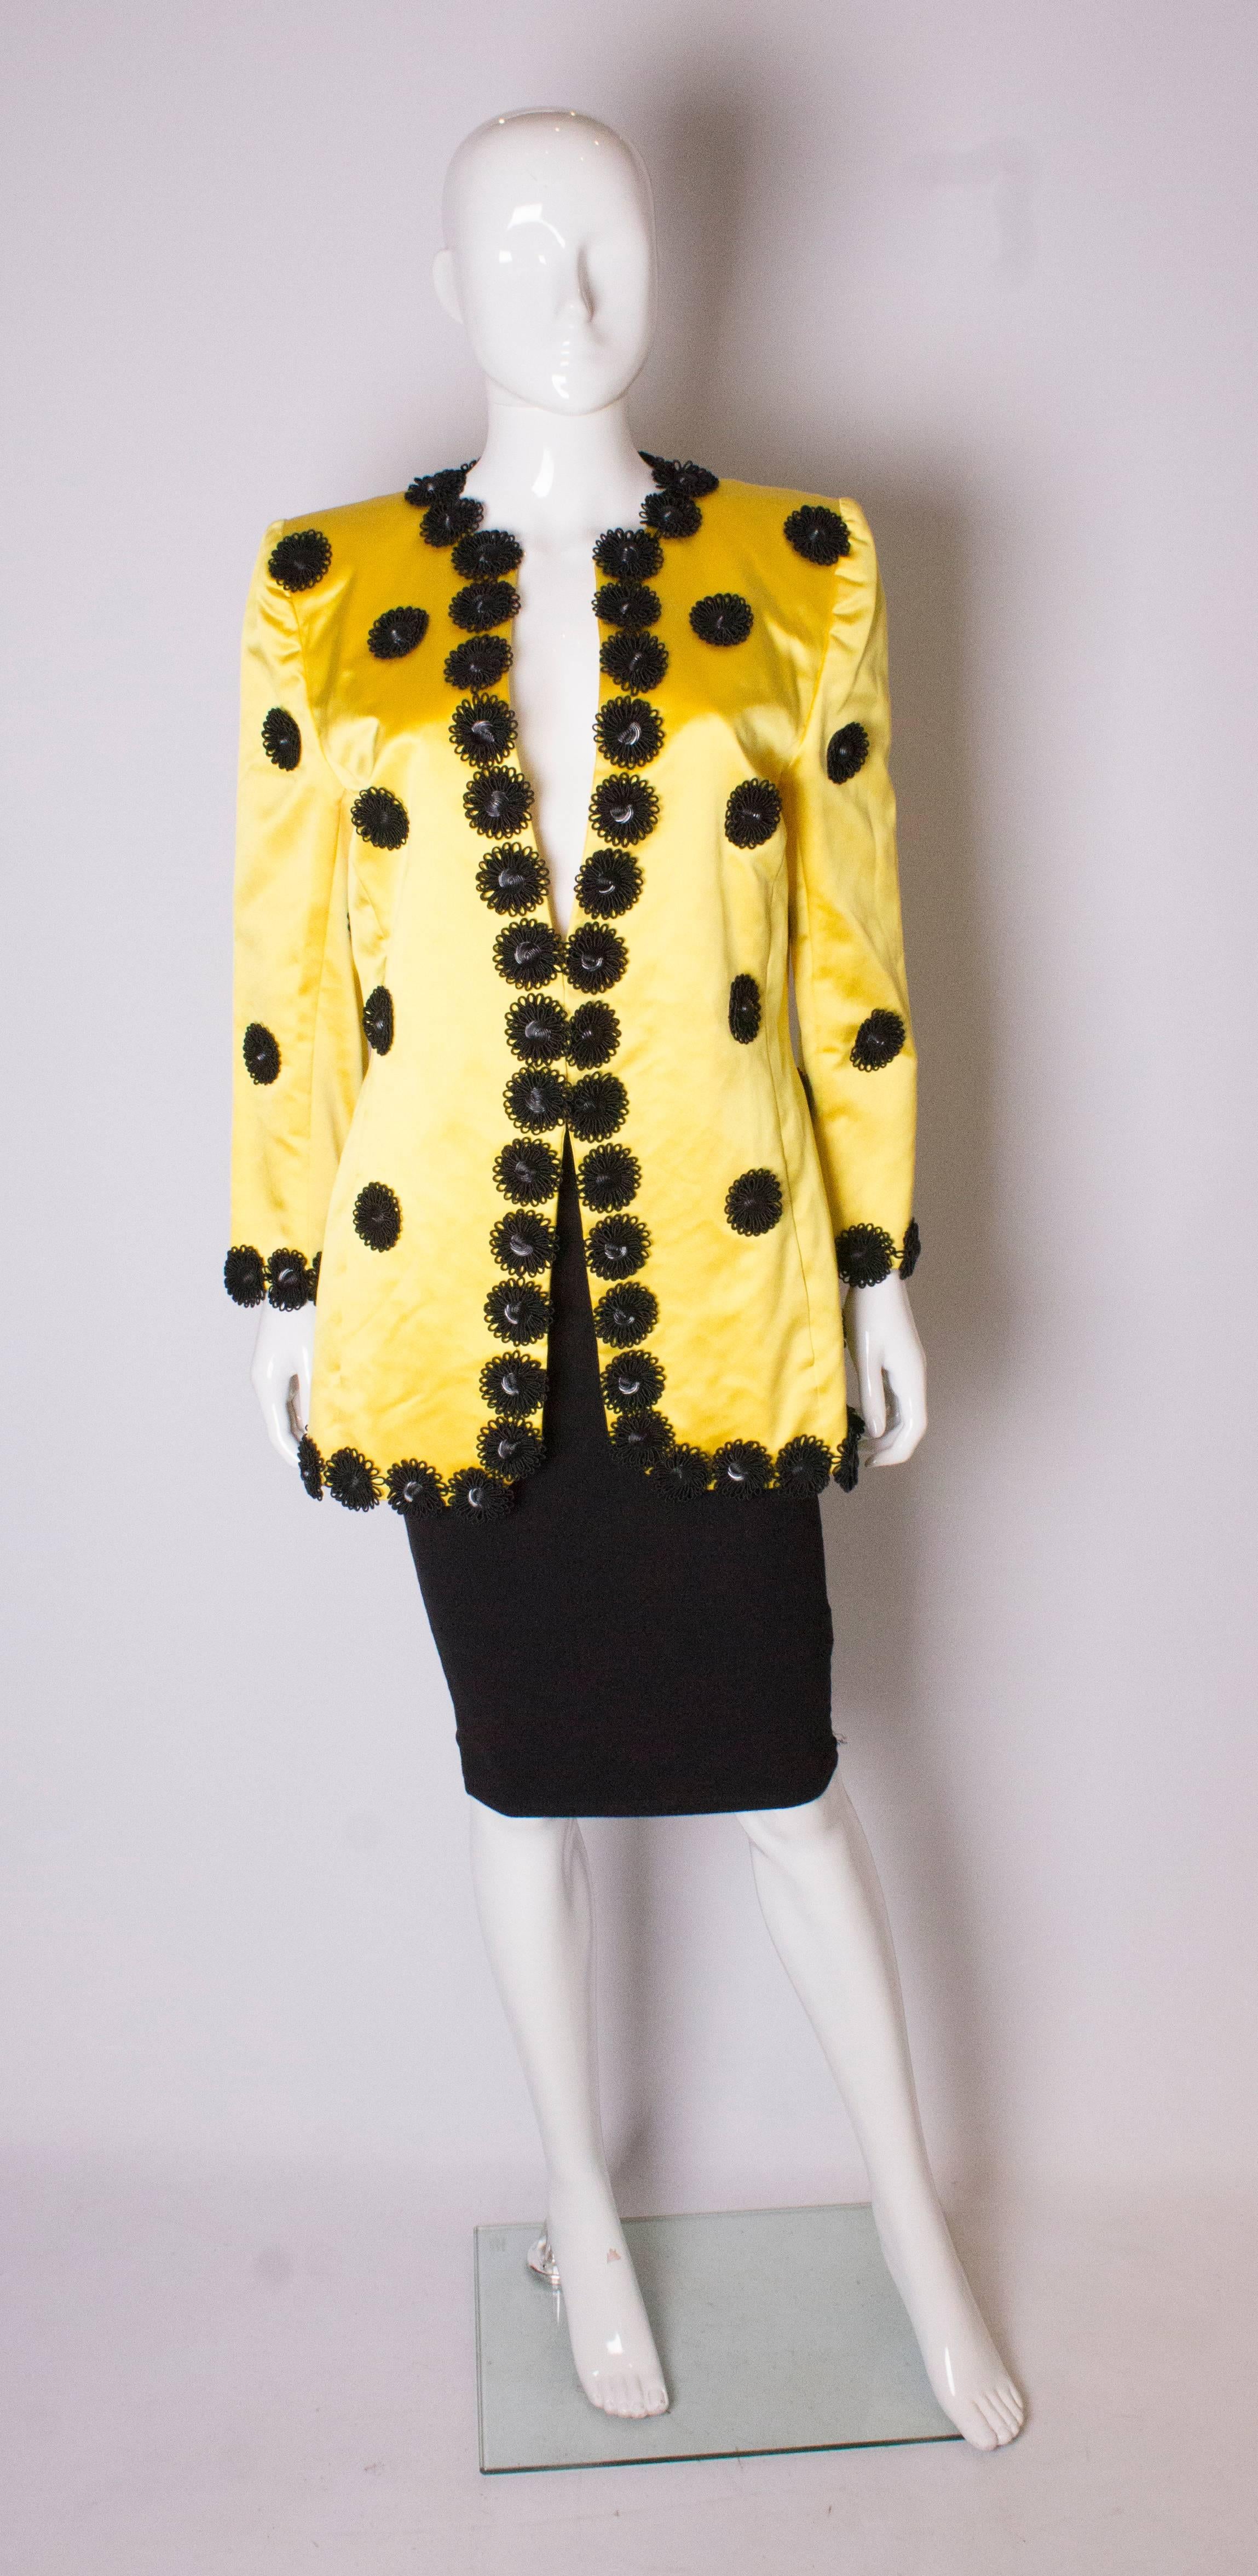 A great vintage jacket for Spring . The jacket is in yellow silk satin with black floral like embellishment. It is fully lined and has a pocket on either side.